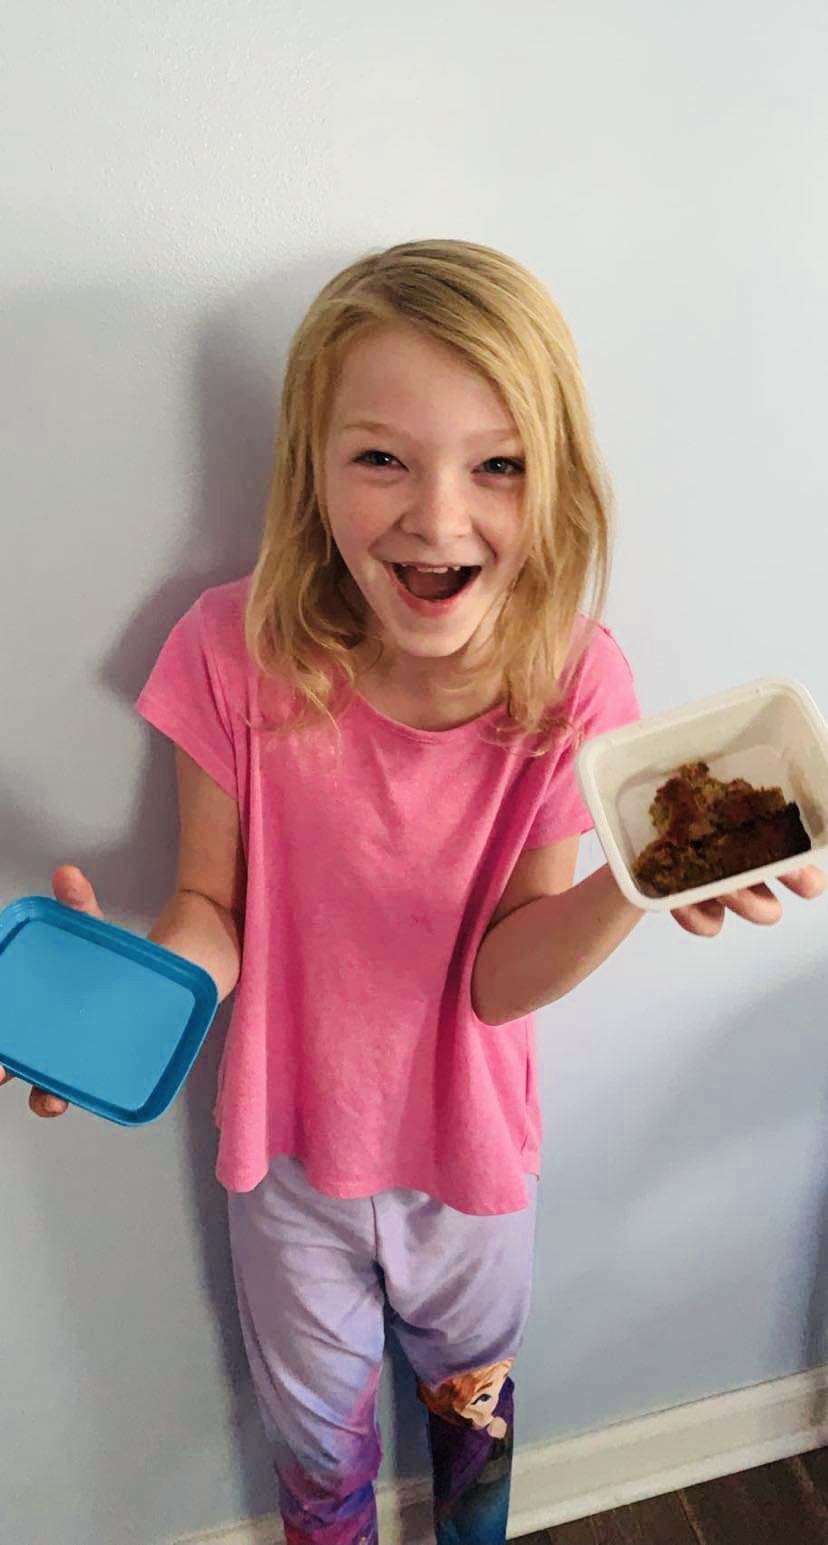 Child holding an empty food container